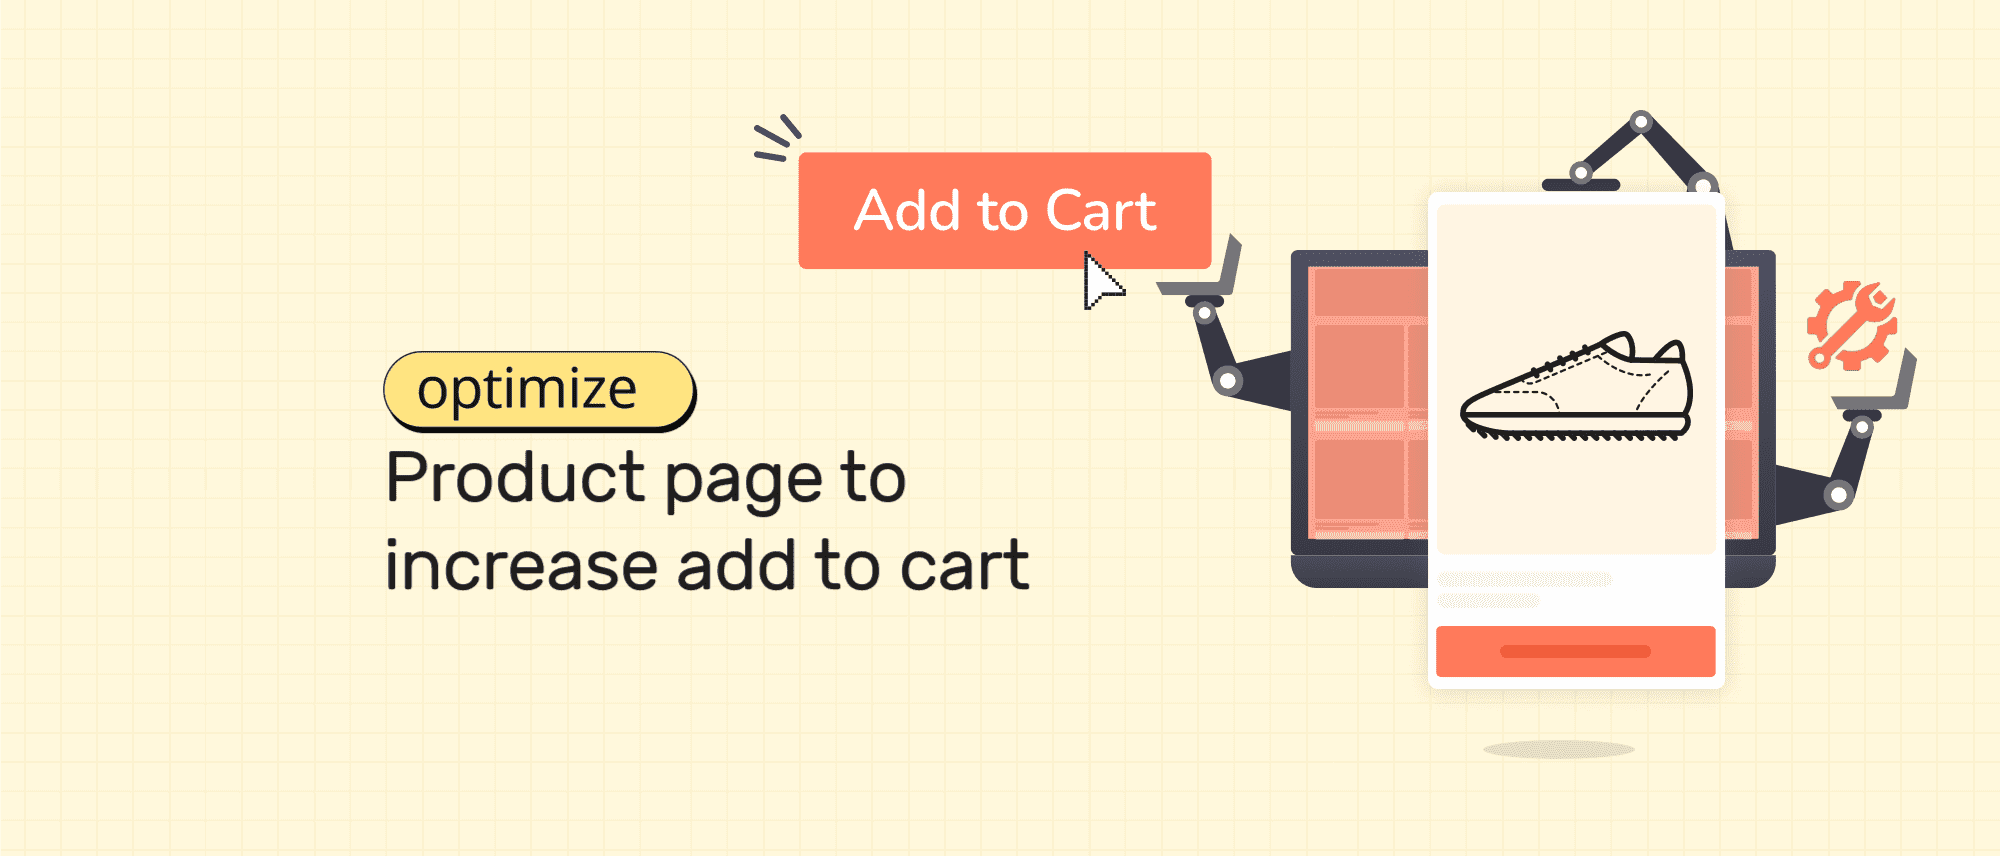 how-do-i-optimize-my-product-pages-to-increase-add-to-carts